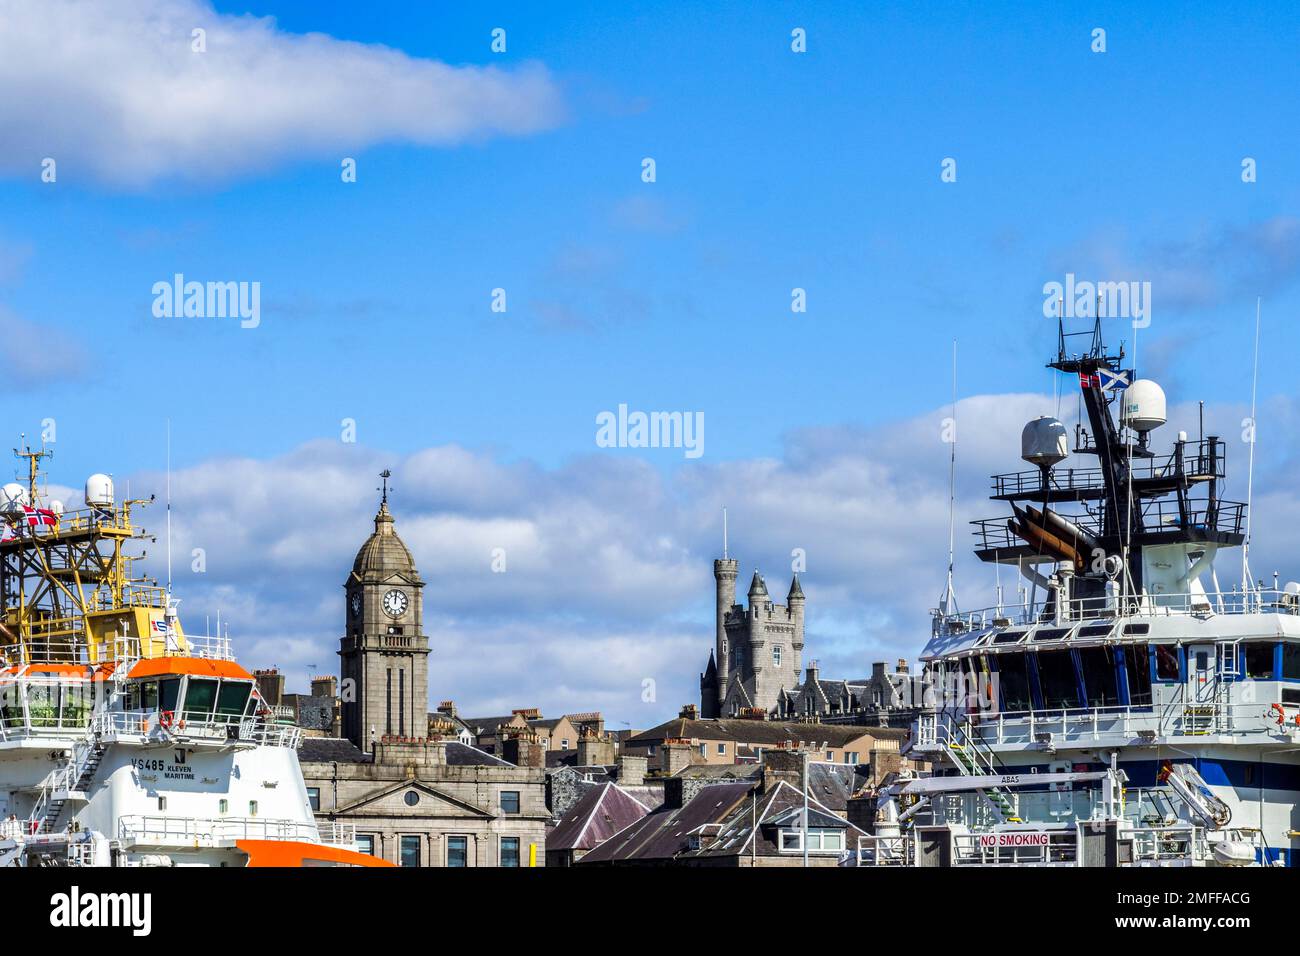 13 September 2022: Aberdeen, Scotland, UK - Aberdeen skyline, contrasting the traditional granite towers with the superstructures of modern offshore... Stock Photo